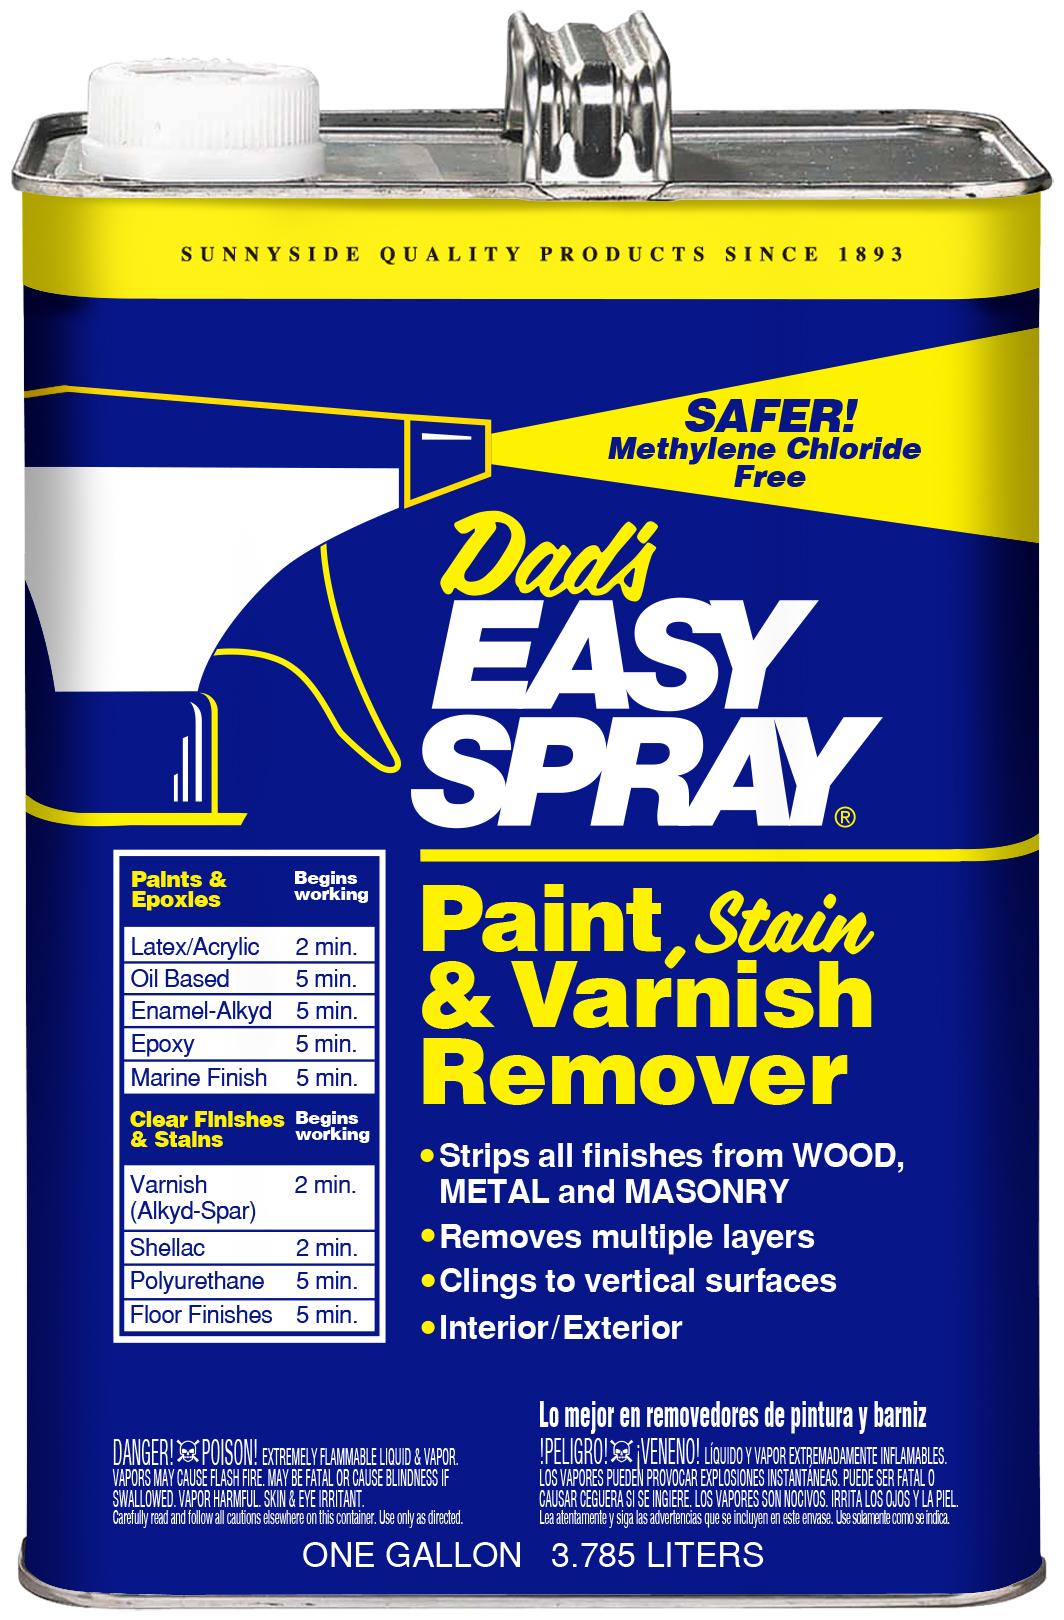 DAD'S EASY SPRAY Product Image